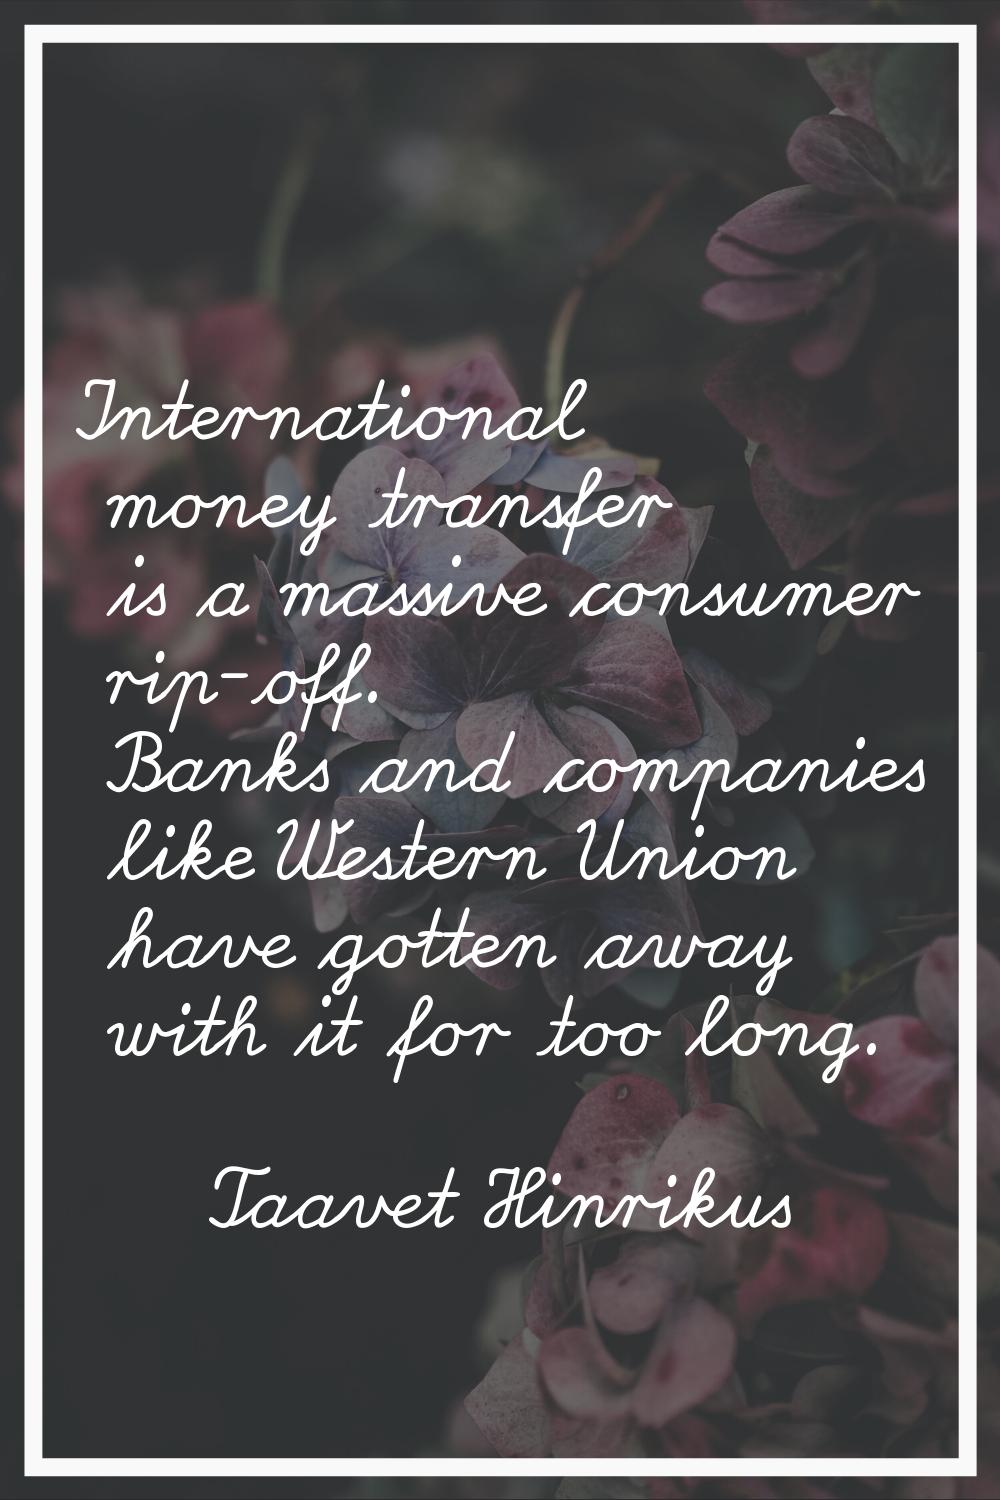 International money transfer is a massive consumer rip-off. Banks and companies like Western Union 